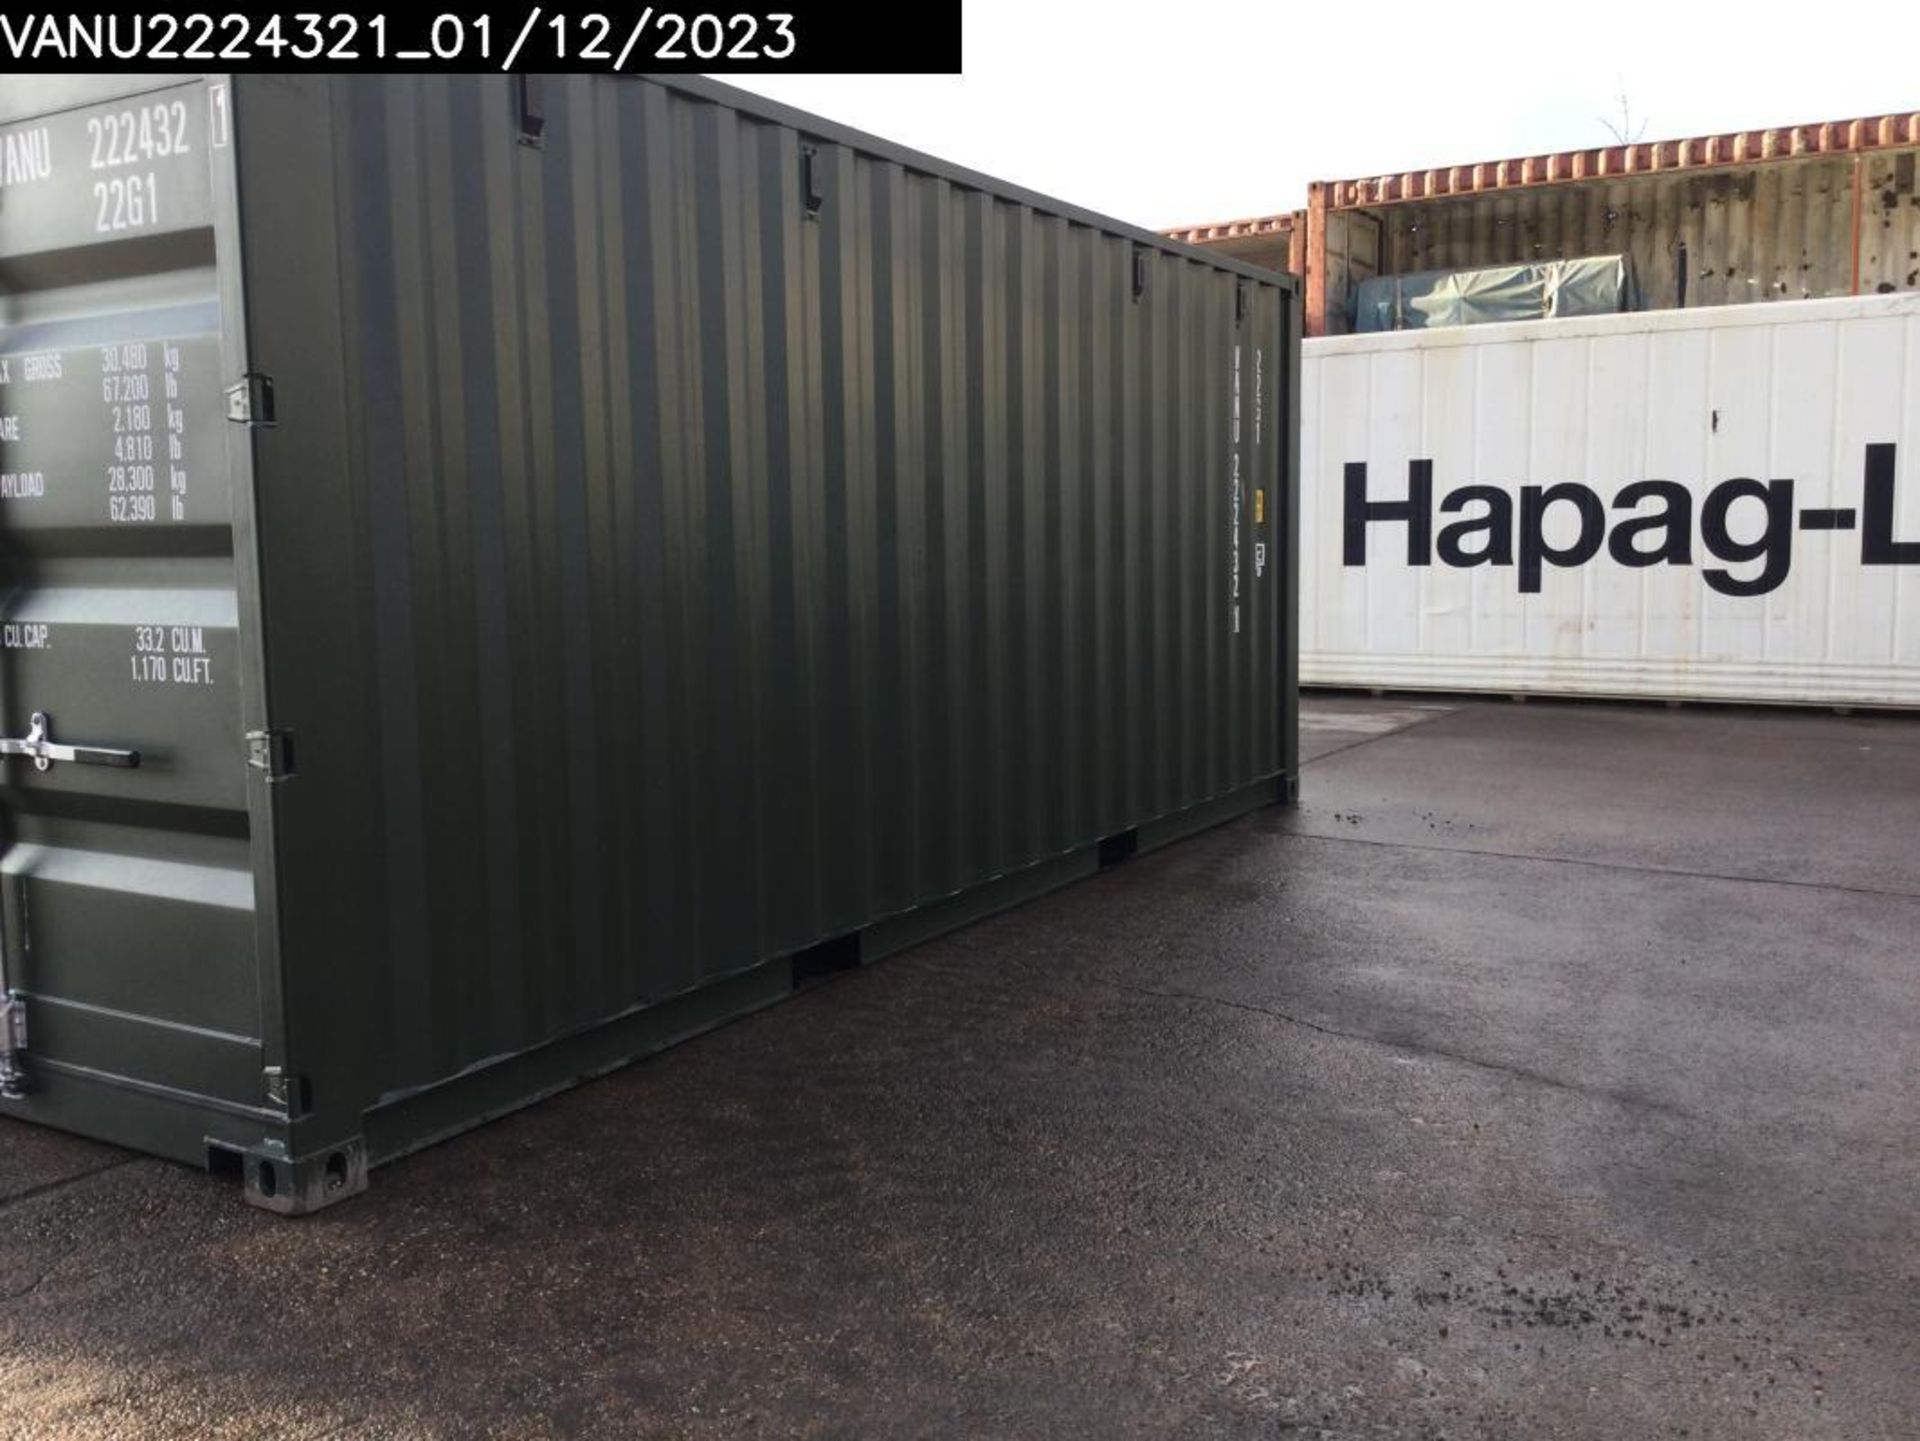 One Trip 20ft Shipping Container - Unit Number – VANU2224321 - Image 6 of 7